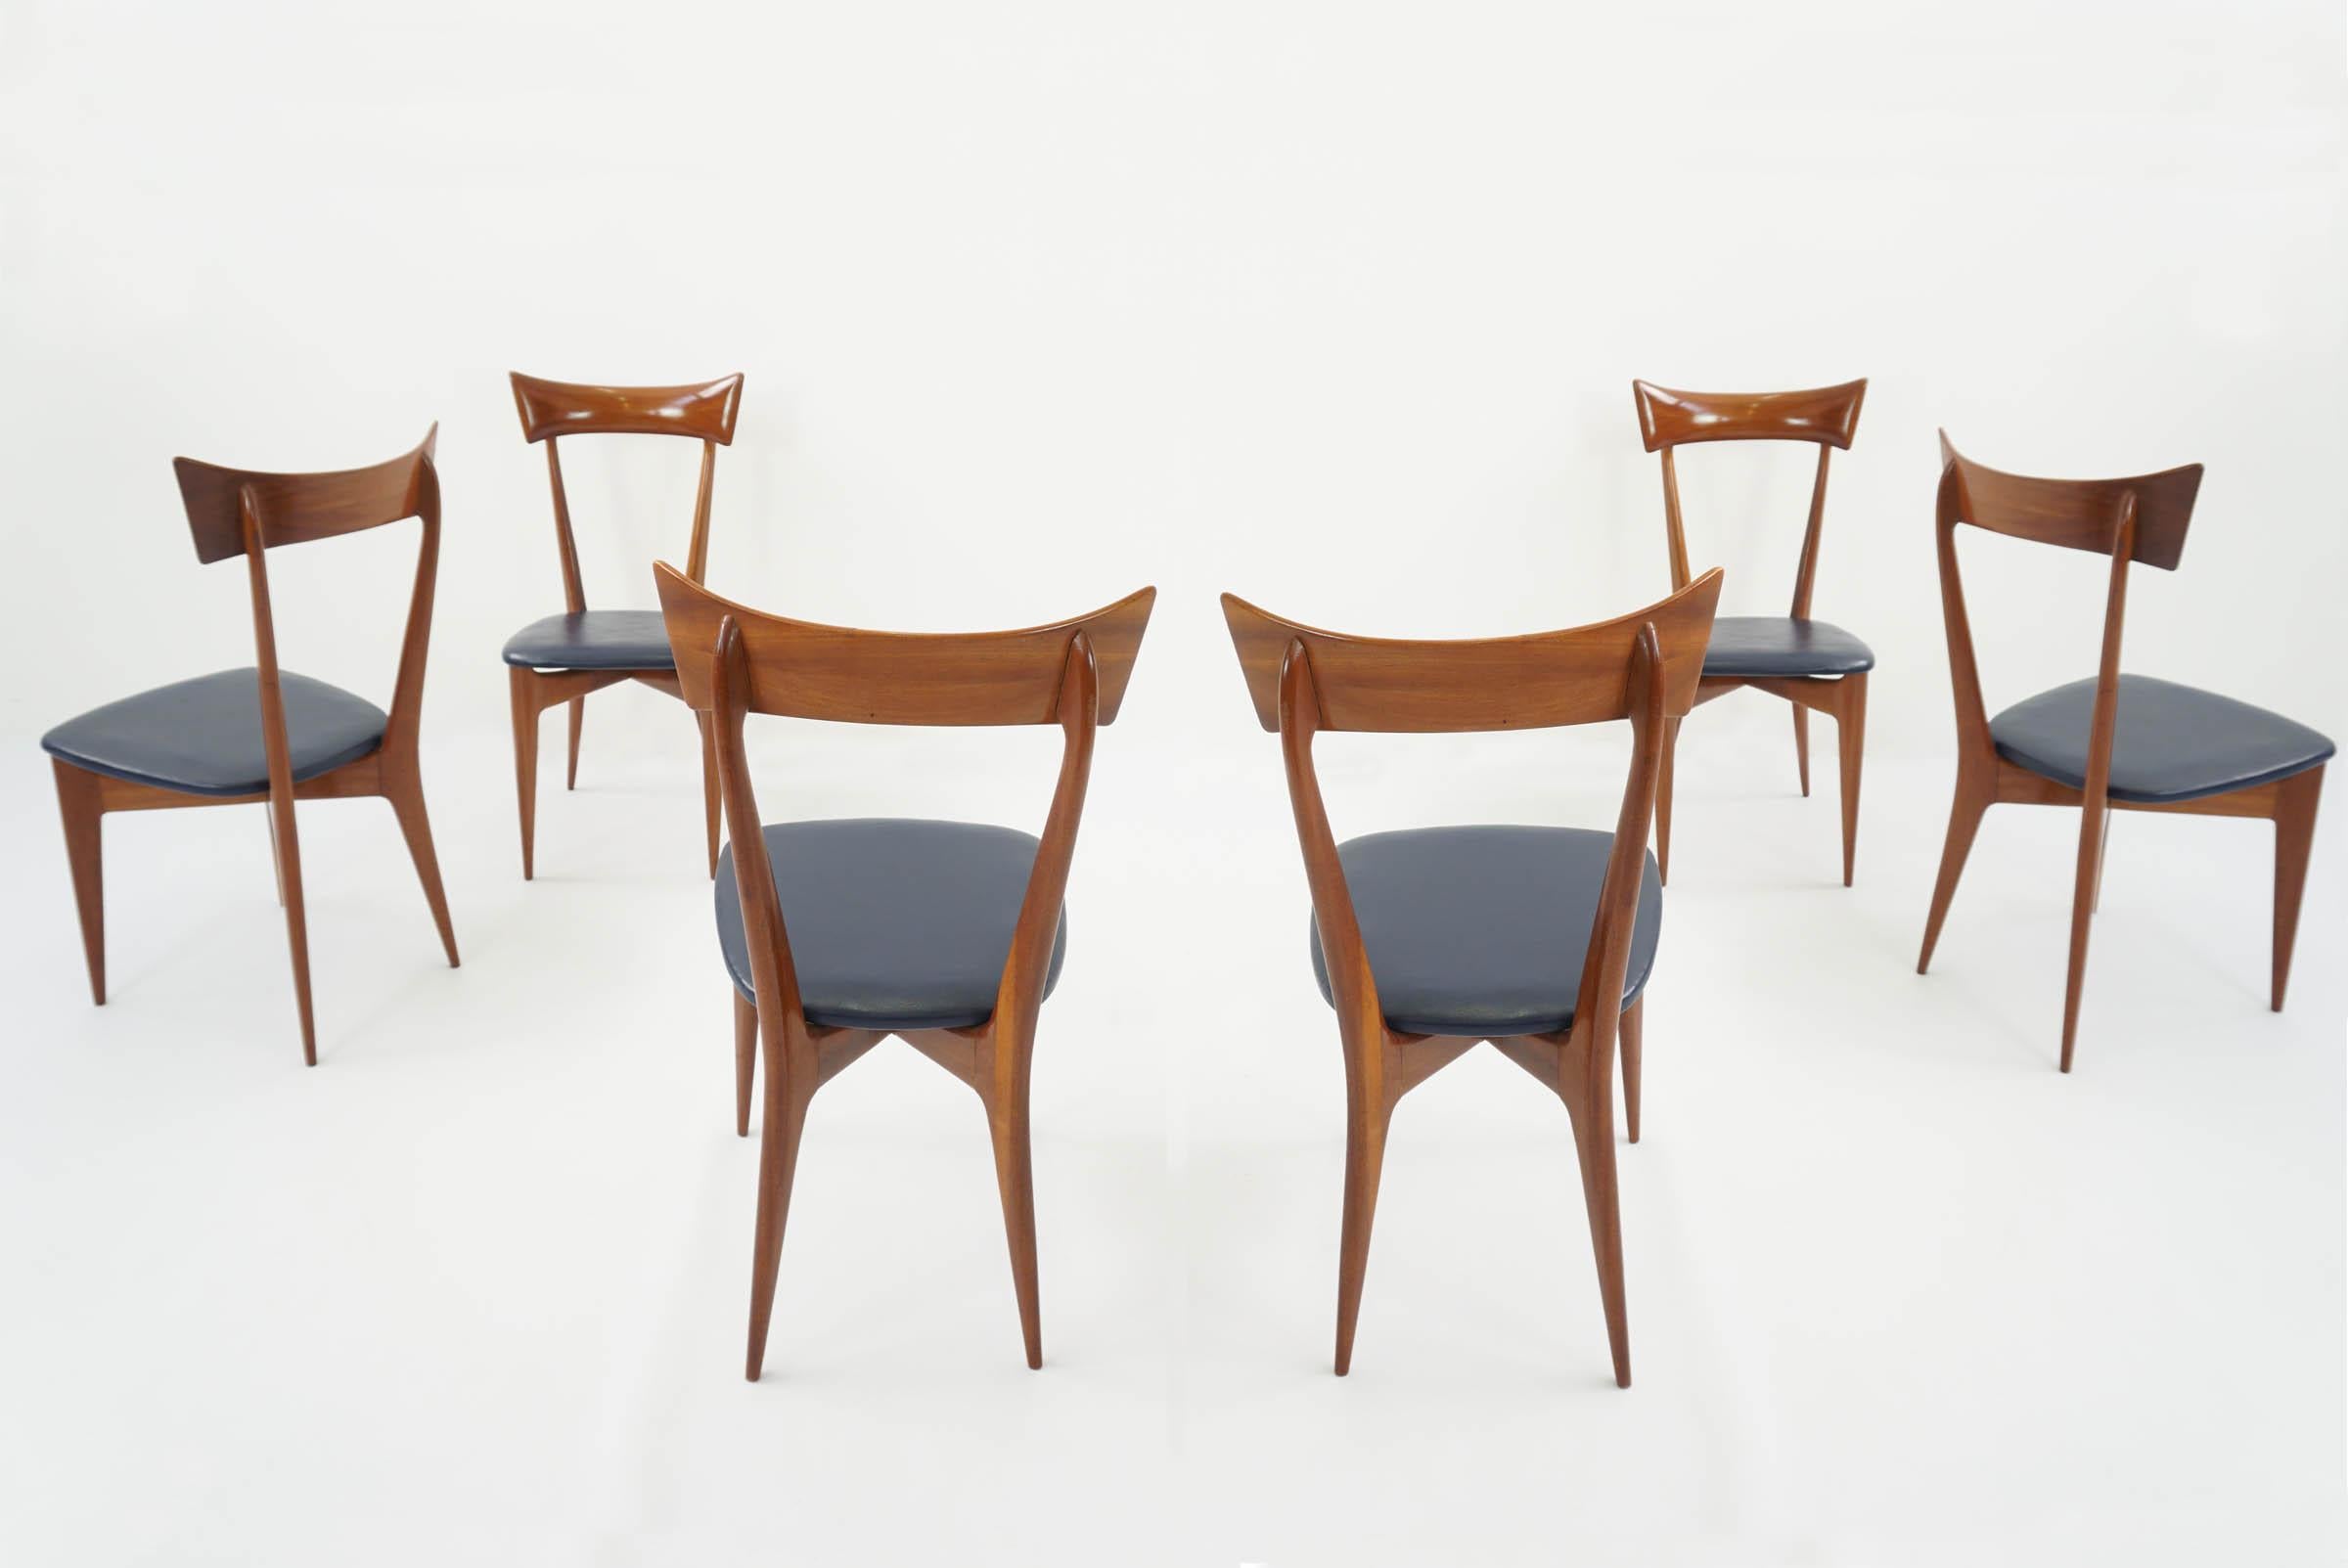 Set of 6 chairs designed during circa 1945
Produced by Ariberto Colombo Cantù, Italy
The chairs are in very good conditions and a great Patina for the seats covered in the original Faux Leather in elegant deep petrol blue.